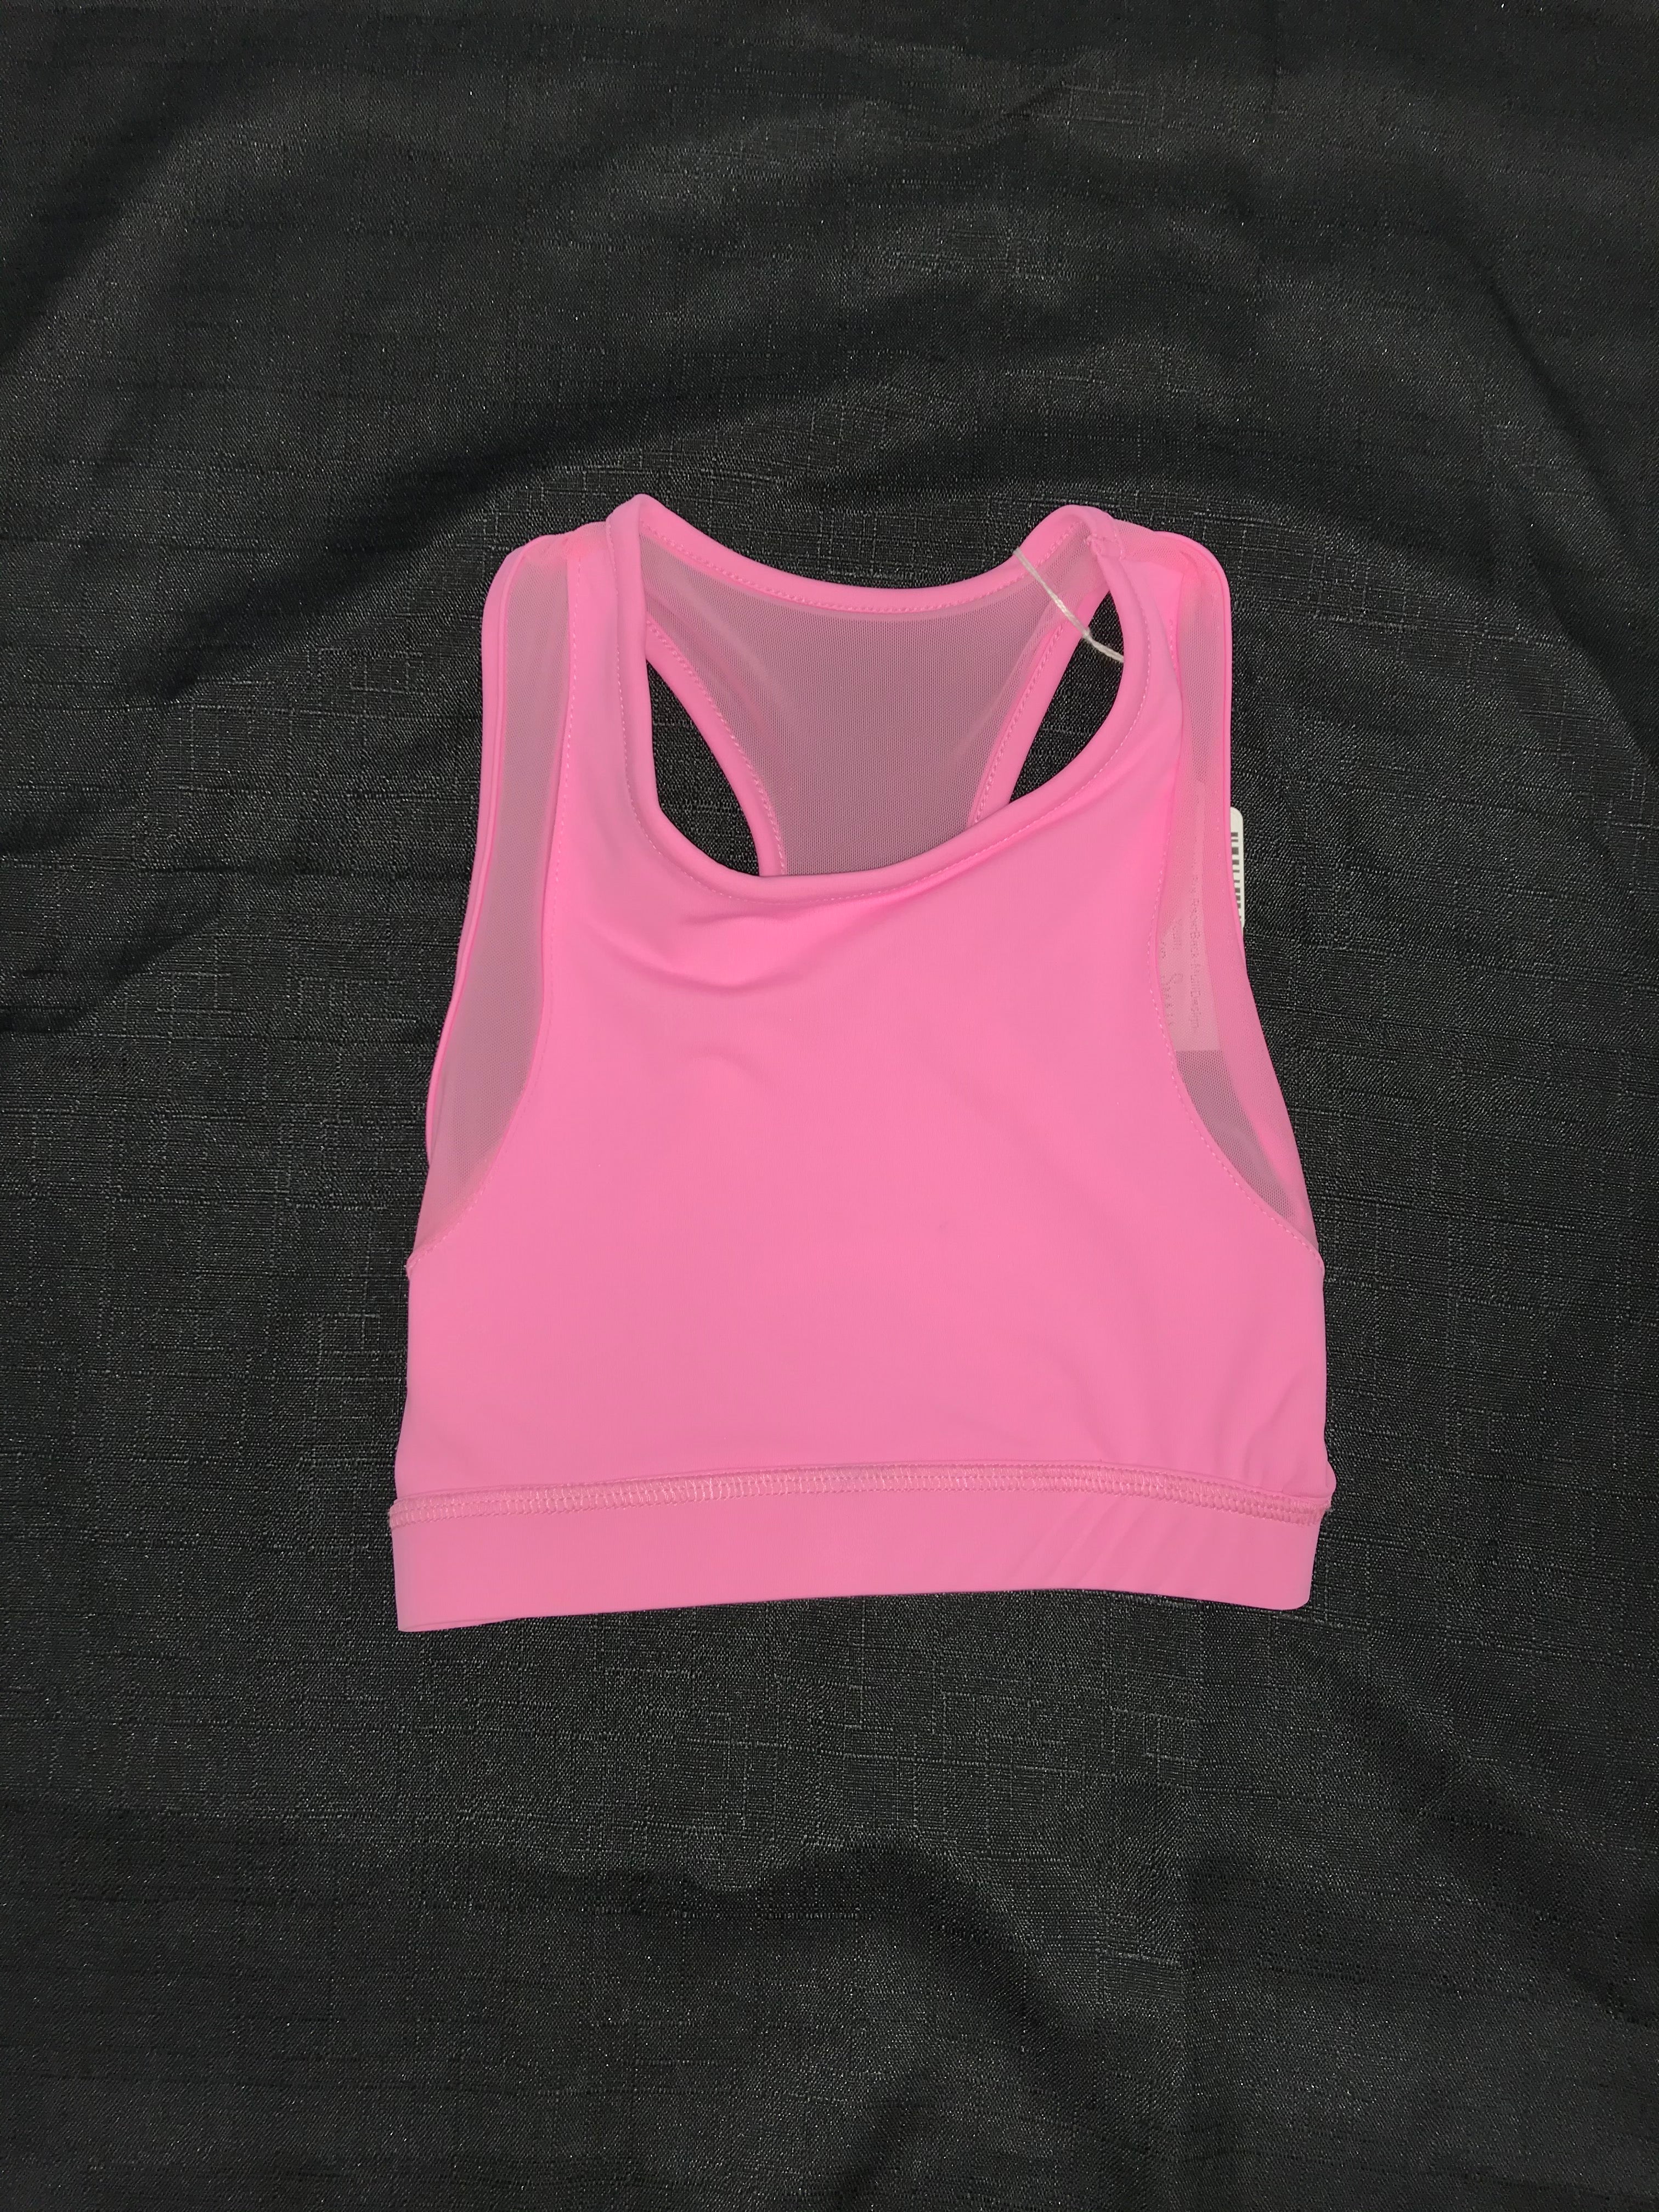 Ryka high neck athletic top/sports bra in faded rose/pink, ribbed. NWOT -  boob cups are missing. Size XL - fits TTS Bid $10 shipped BIN $13…